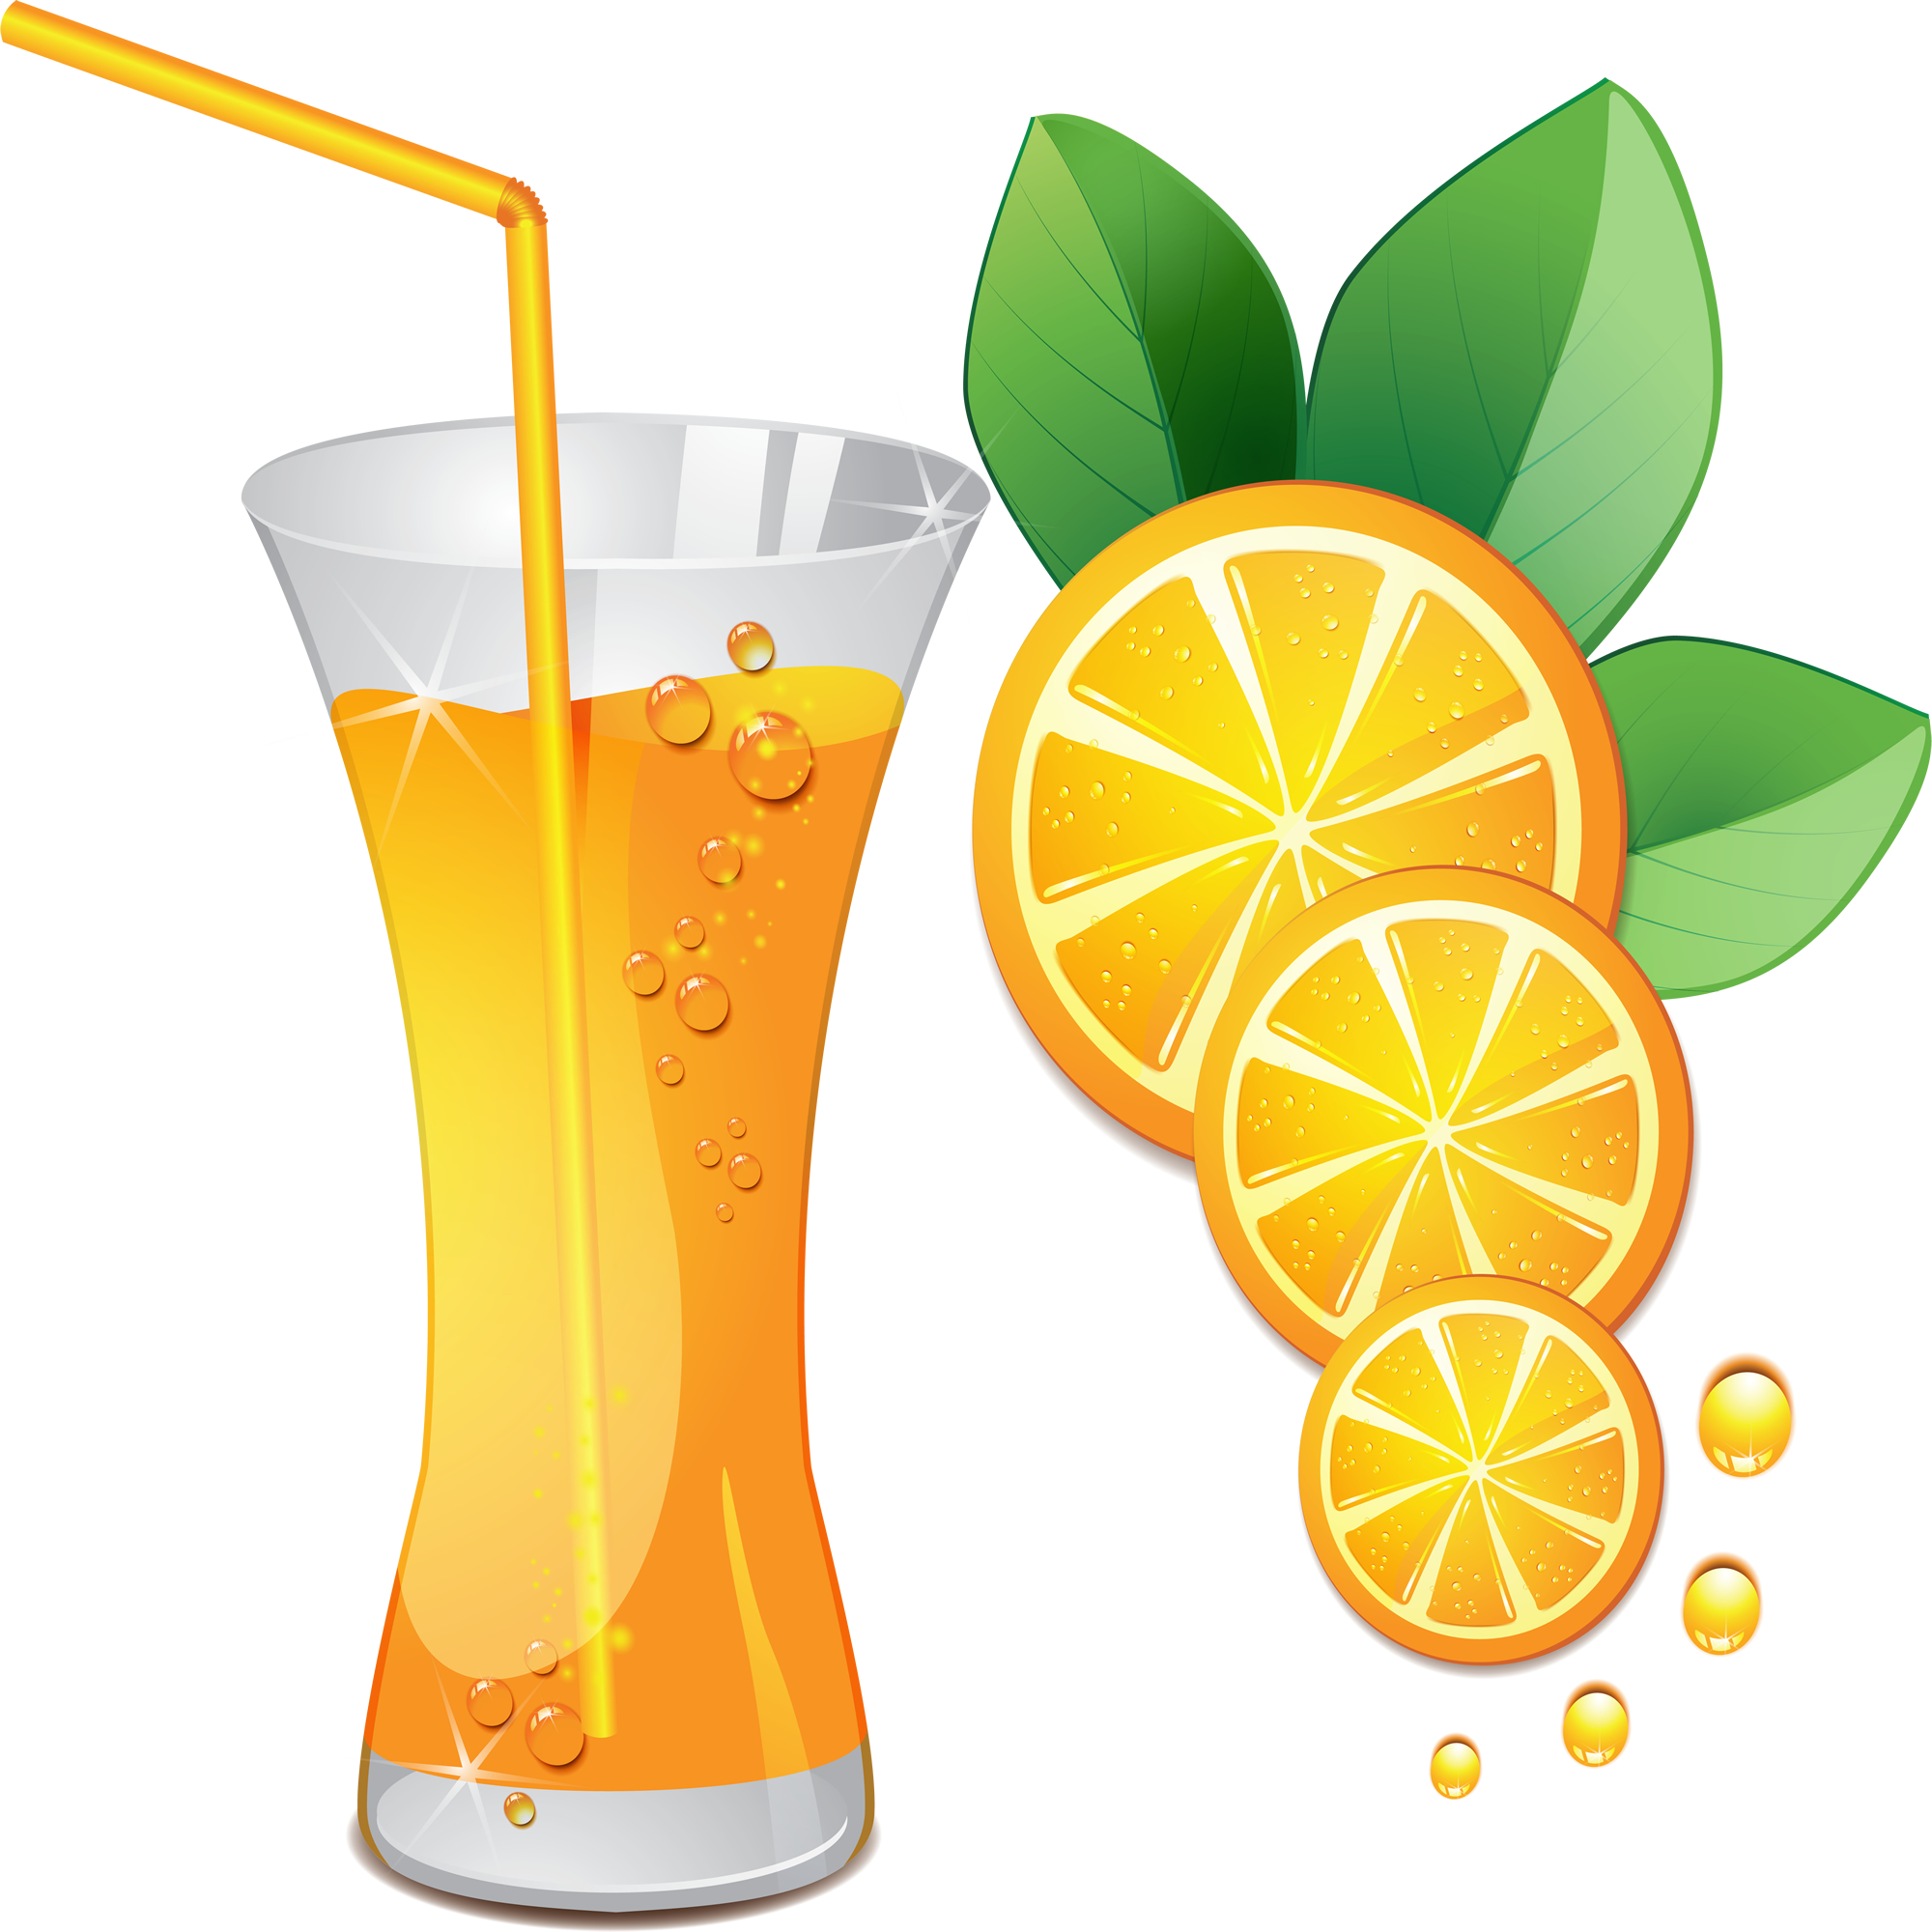 glass of juice clipart - photo #37